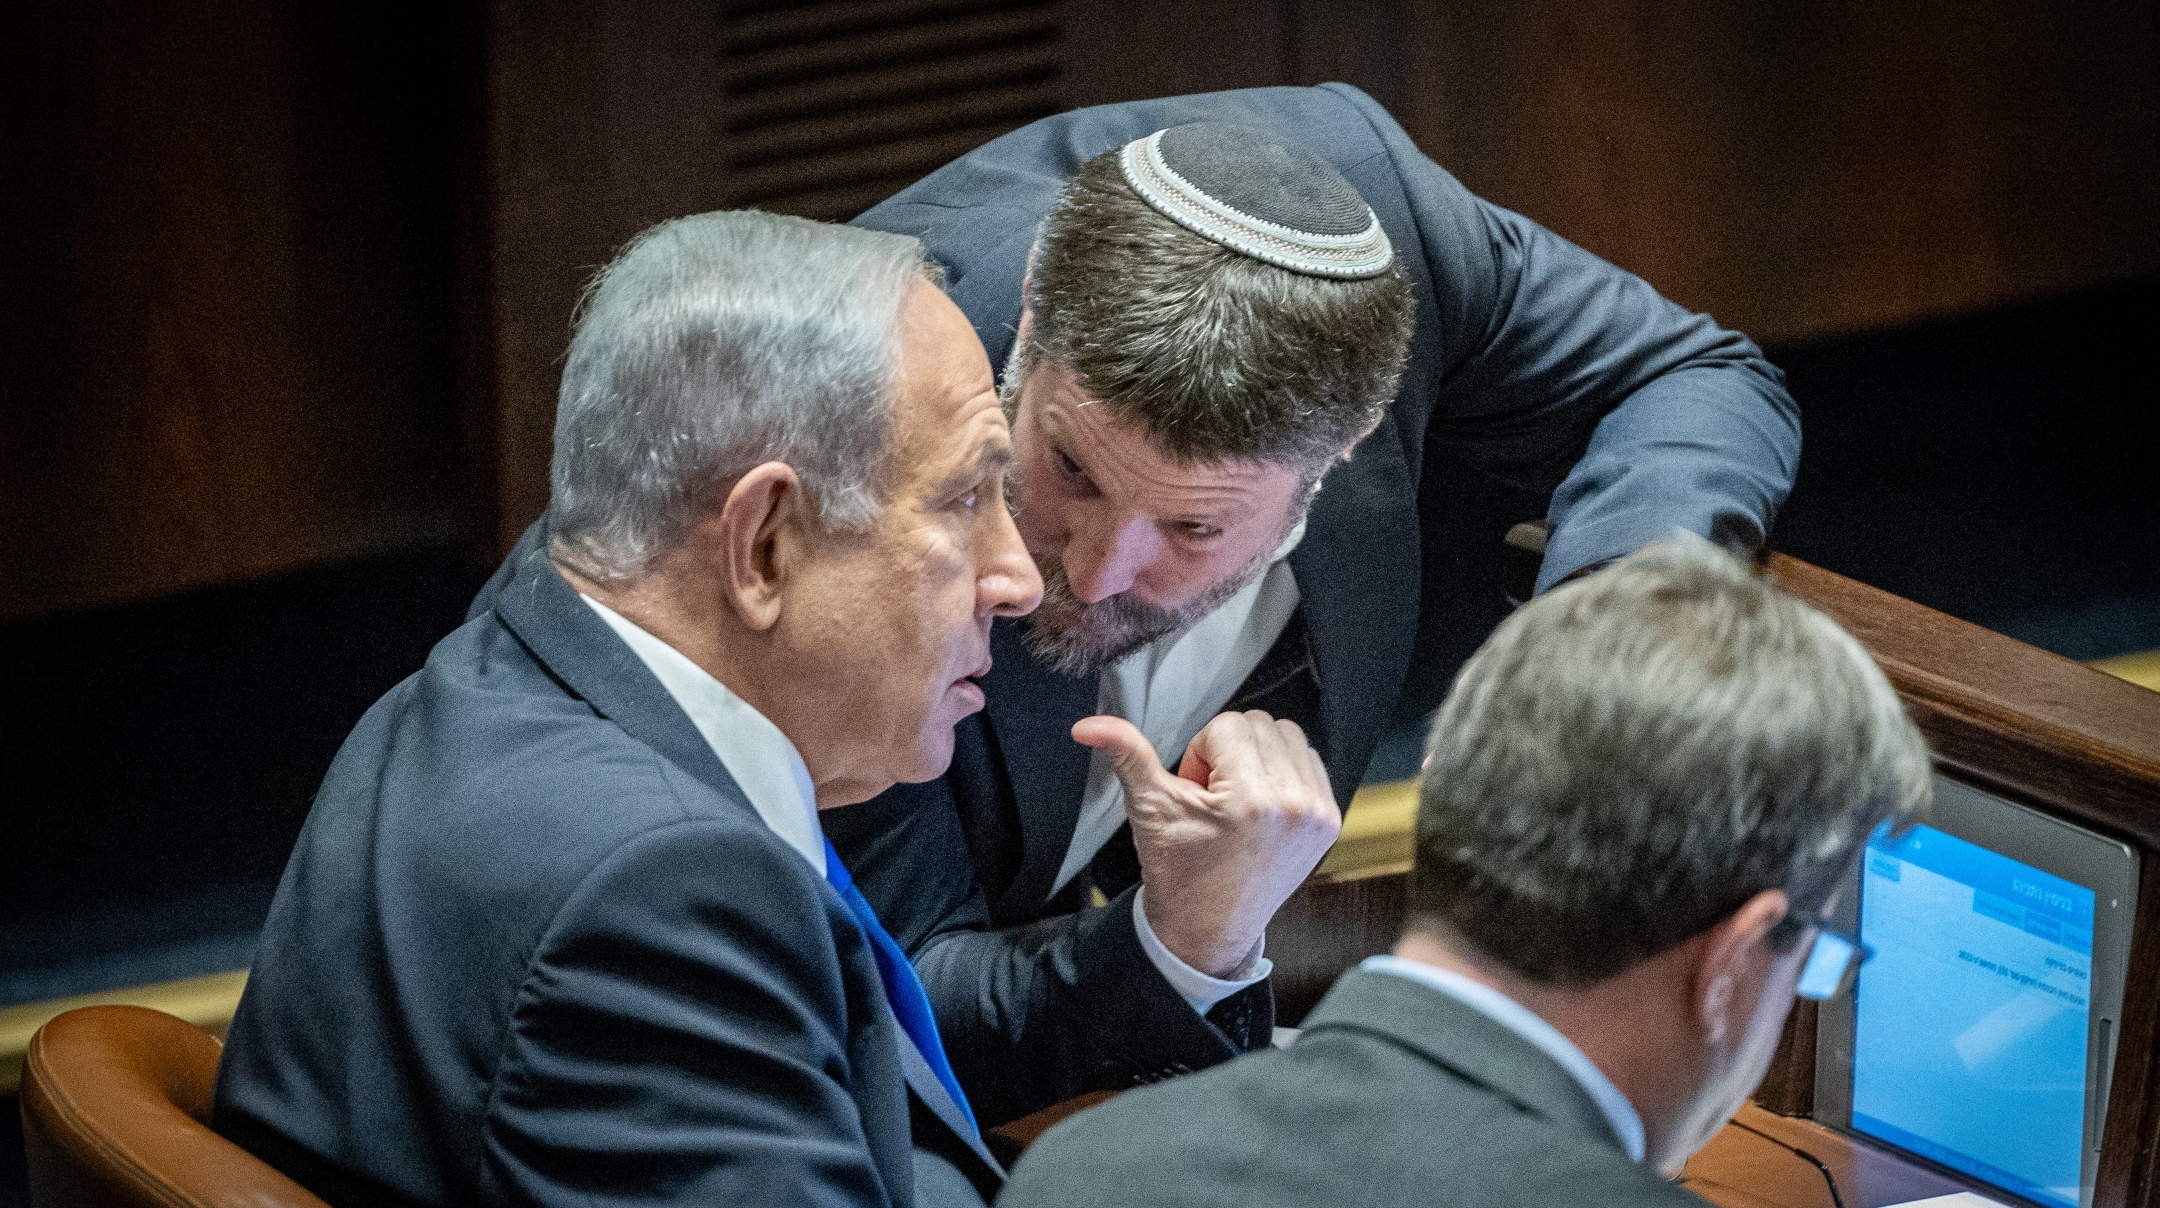 Likud leader MK Benjamin Netanyahu speaks with Religious Zionist party head MK Bezalel Smotrich during a vote in the plenum session at the assembly hall of the Knesset, the Israeli parliament in Jerusalem, Dec. 20, 2022. (Yonatan Sindel/Flash90)